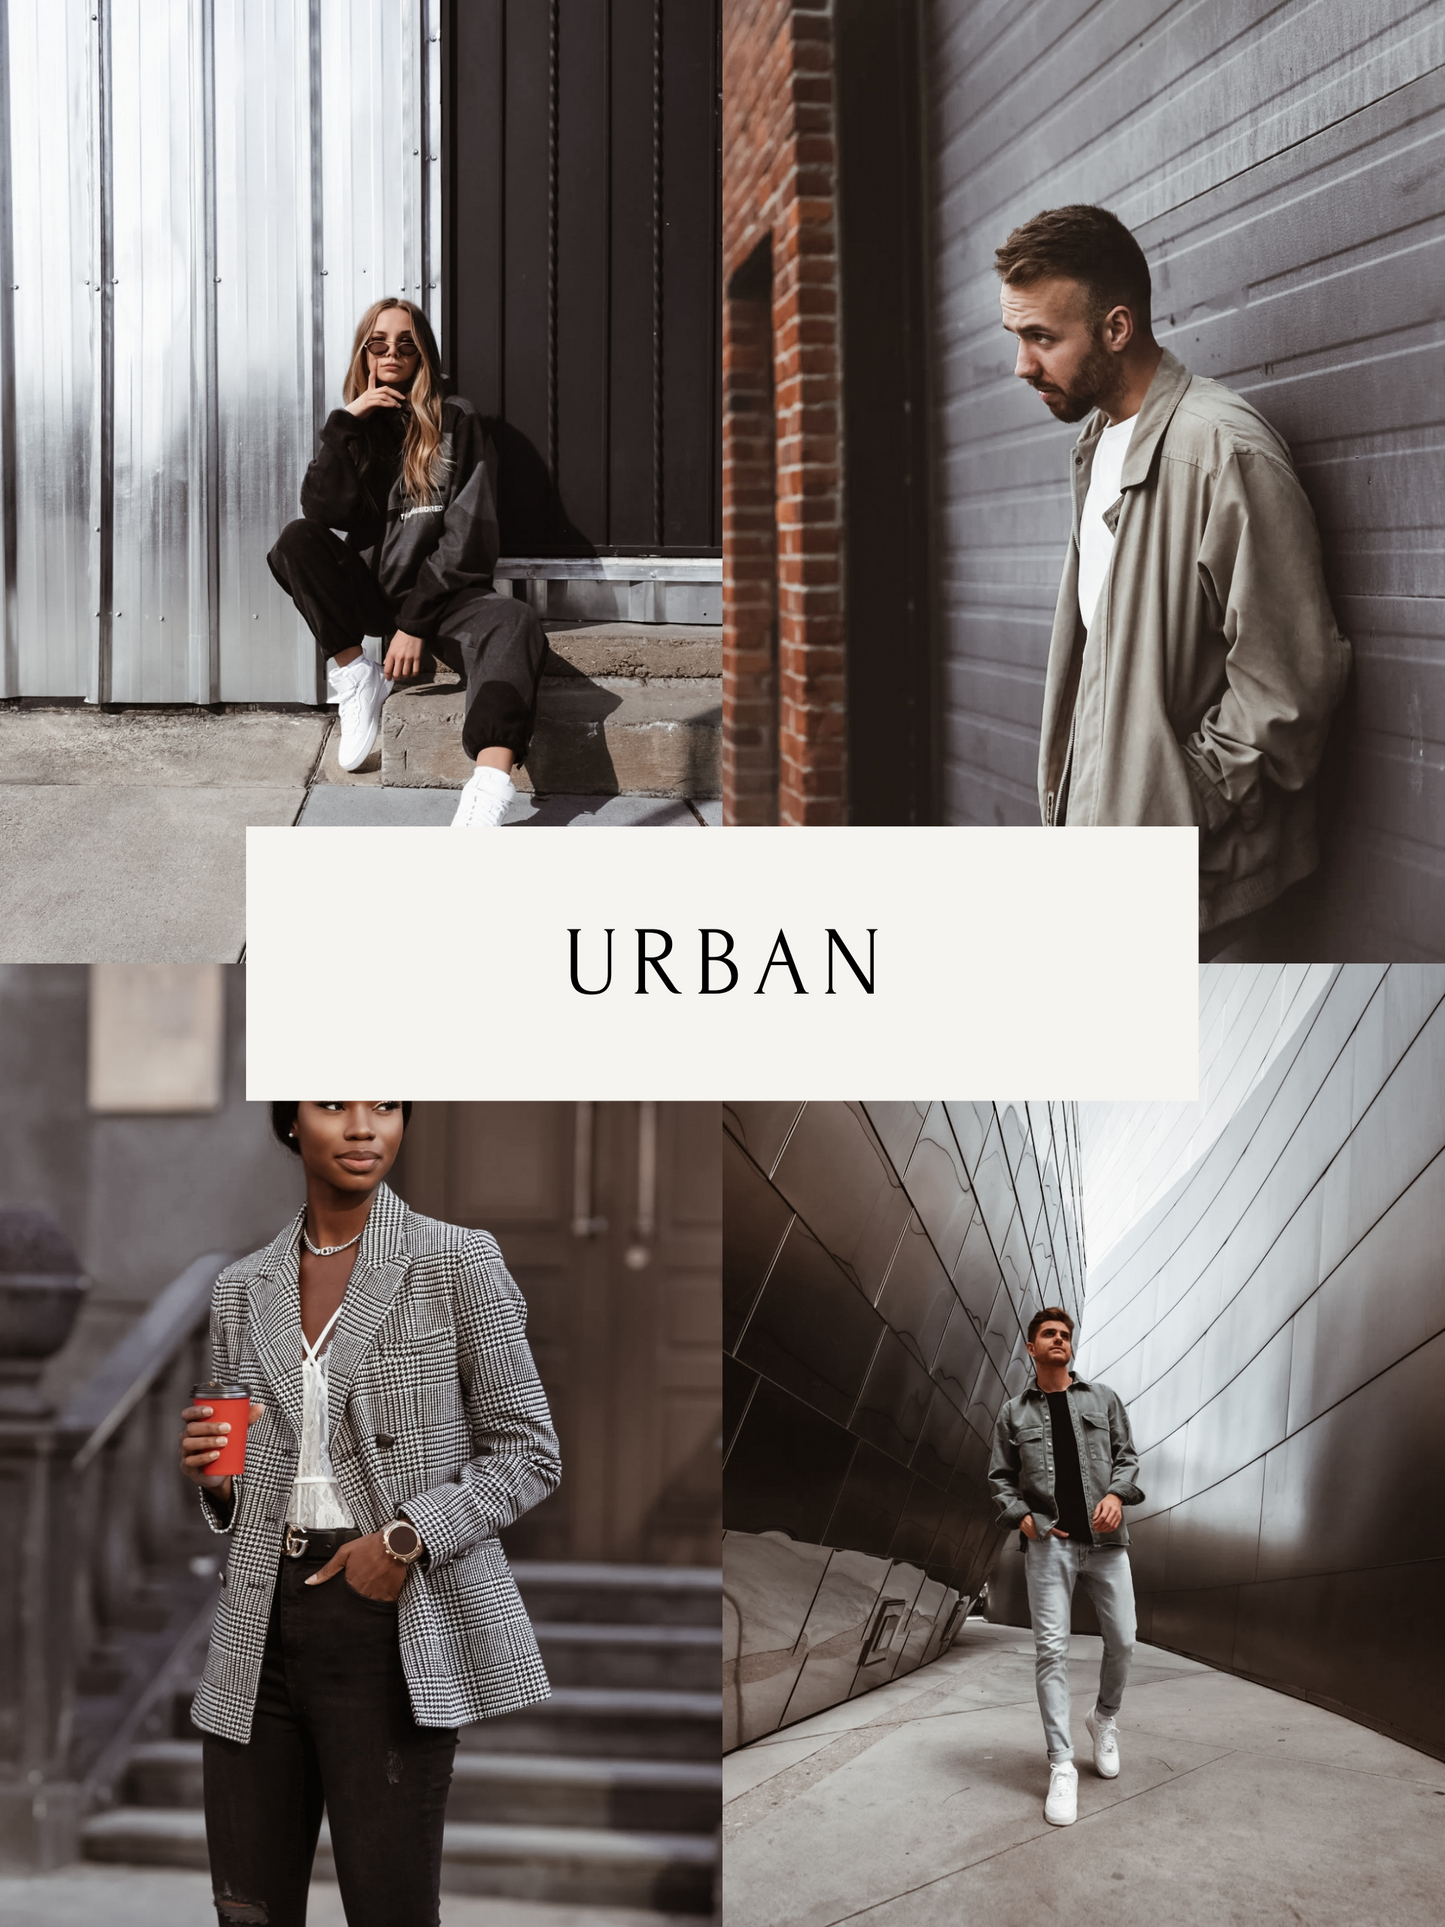 Urban - One Click Filter